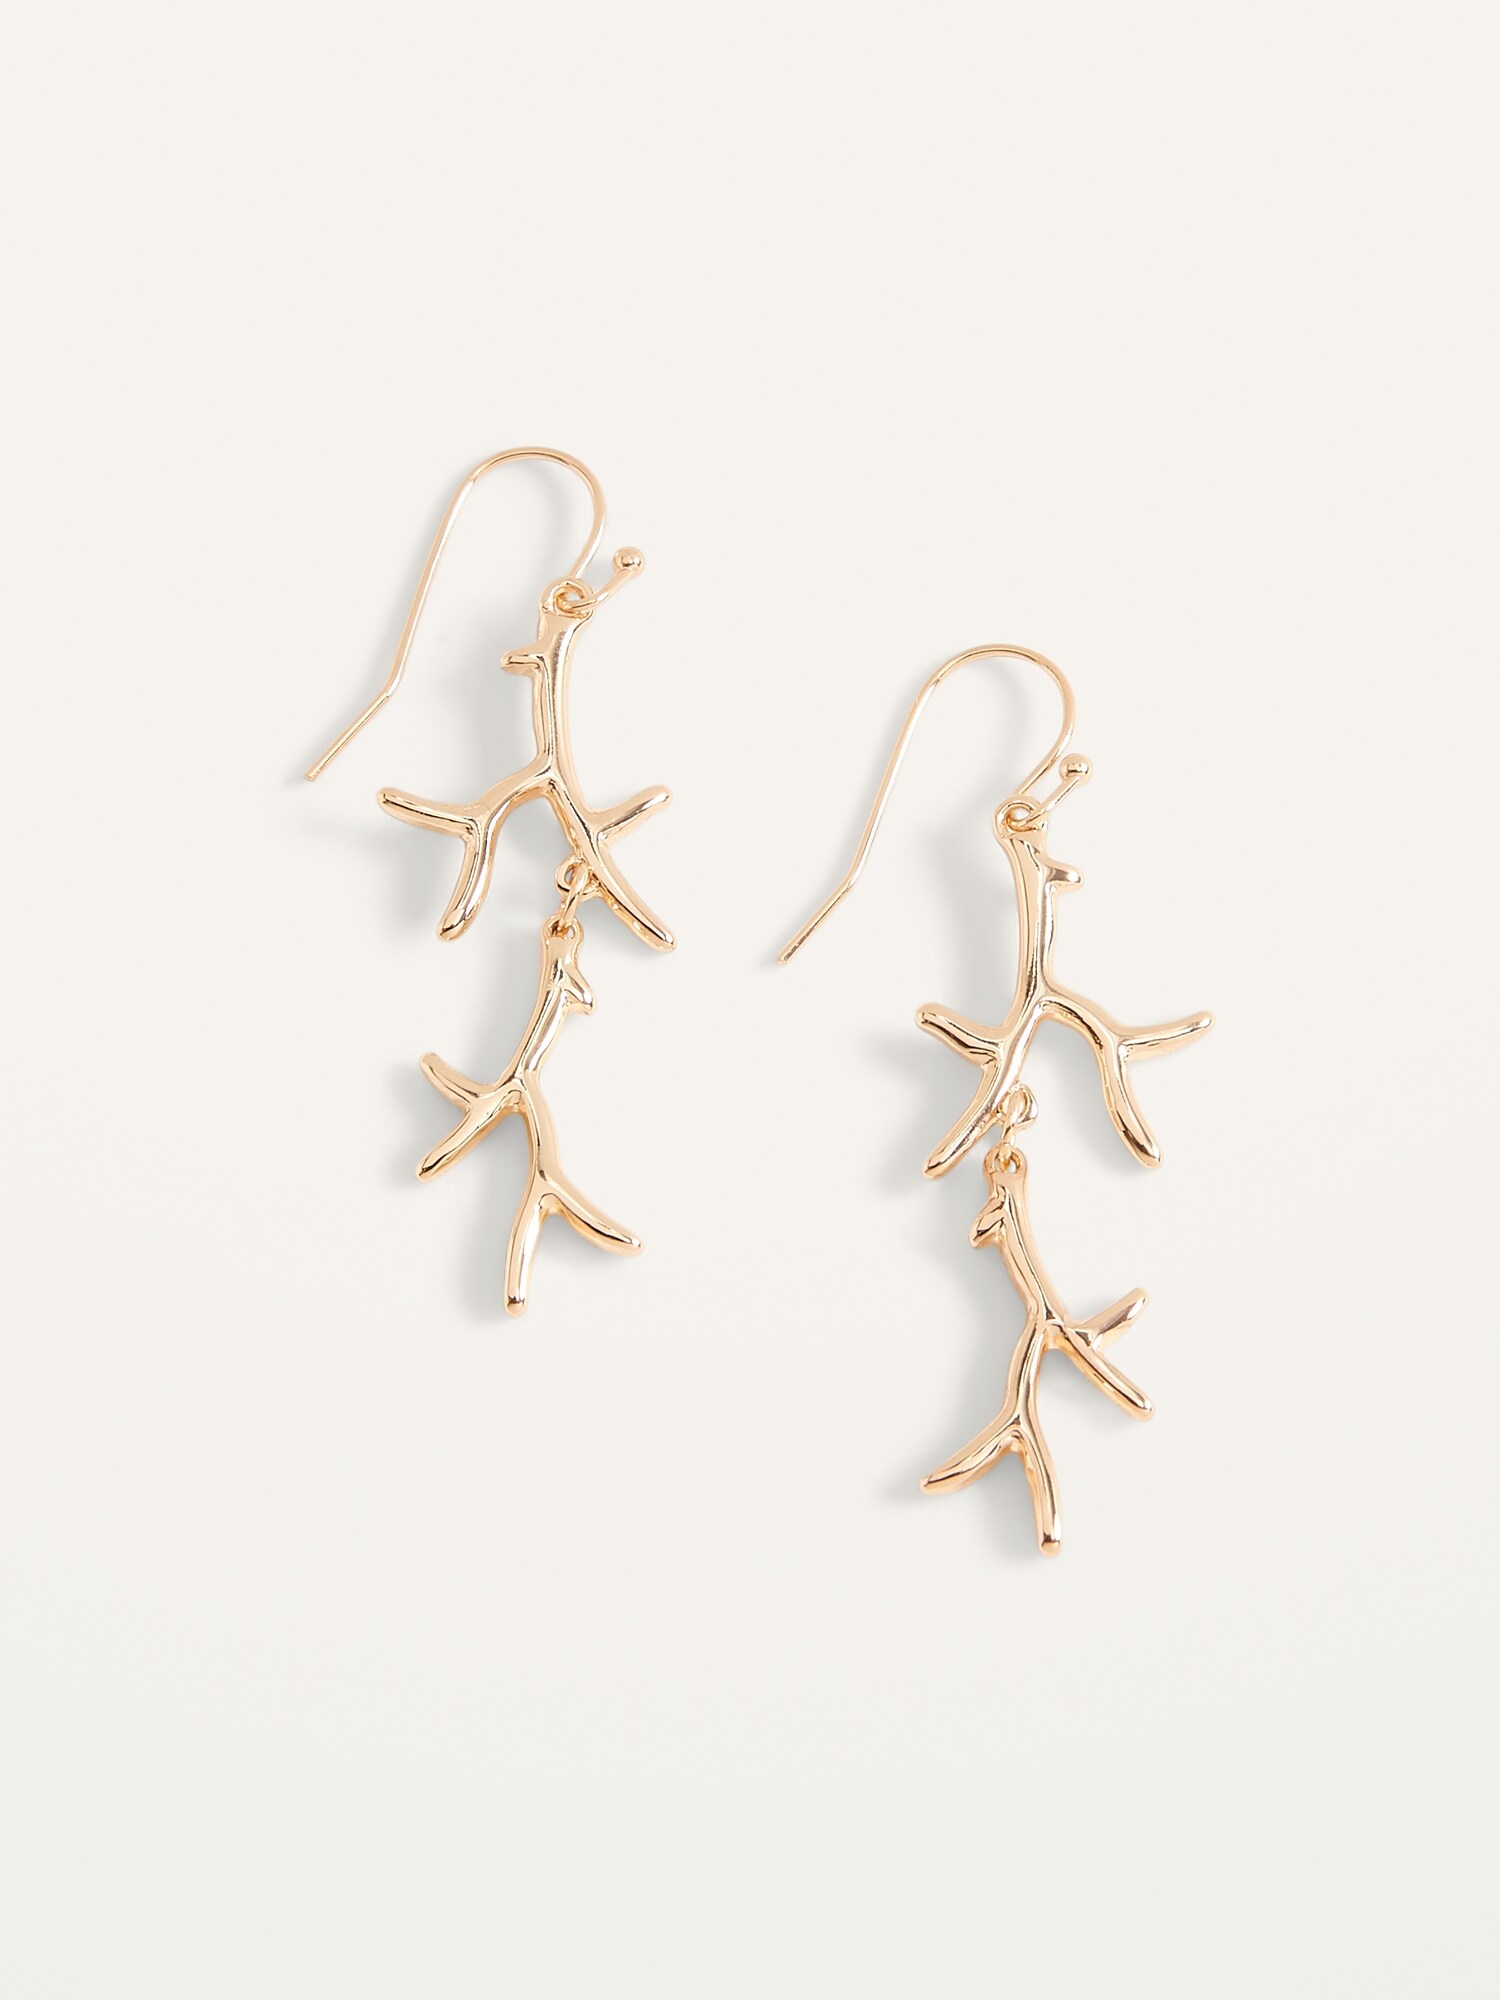 Gold-Toned Coral-Shaped Fishhook Earrings for Women